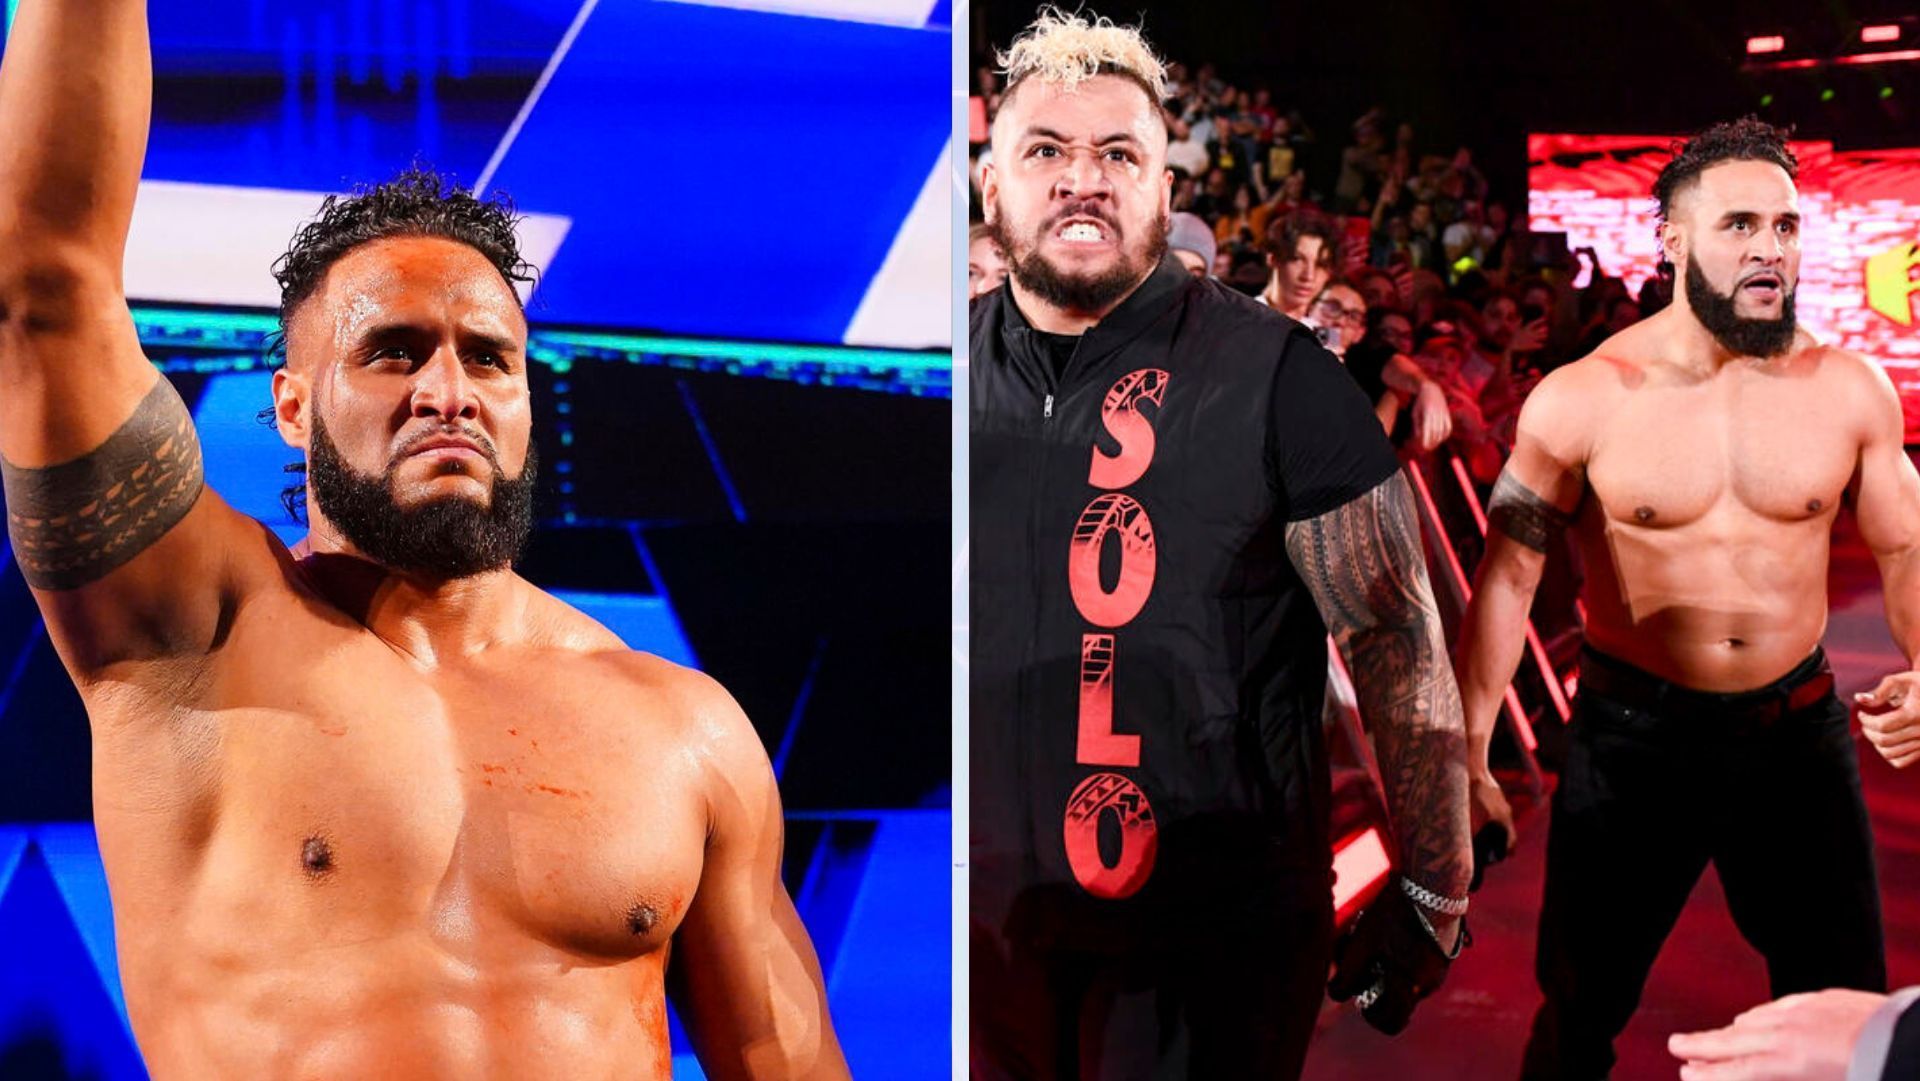 Tama Tonga is the first member added to The Bloodline by Solo Sikoa.